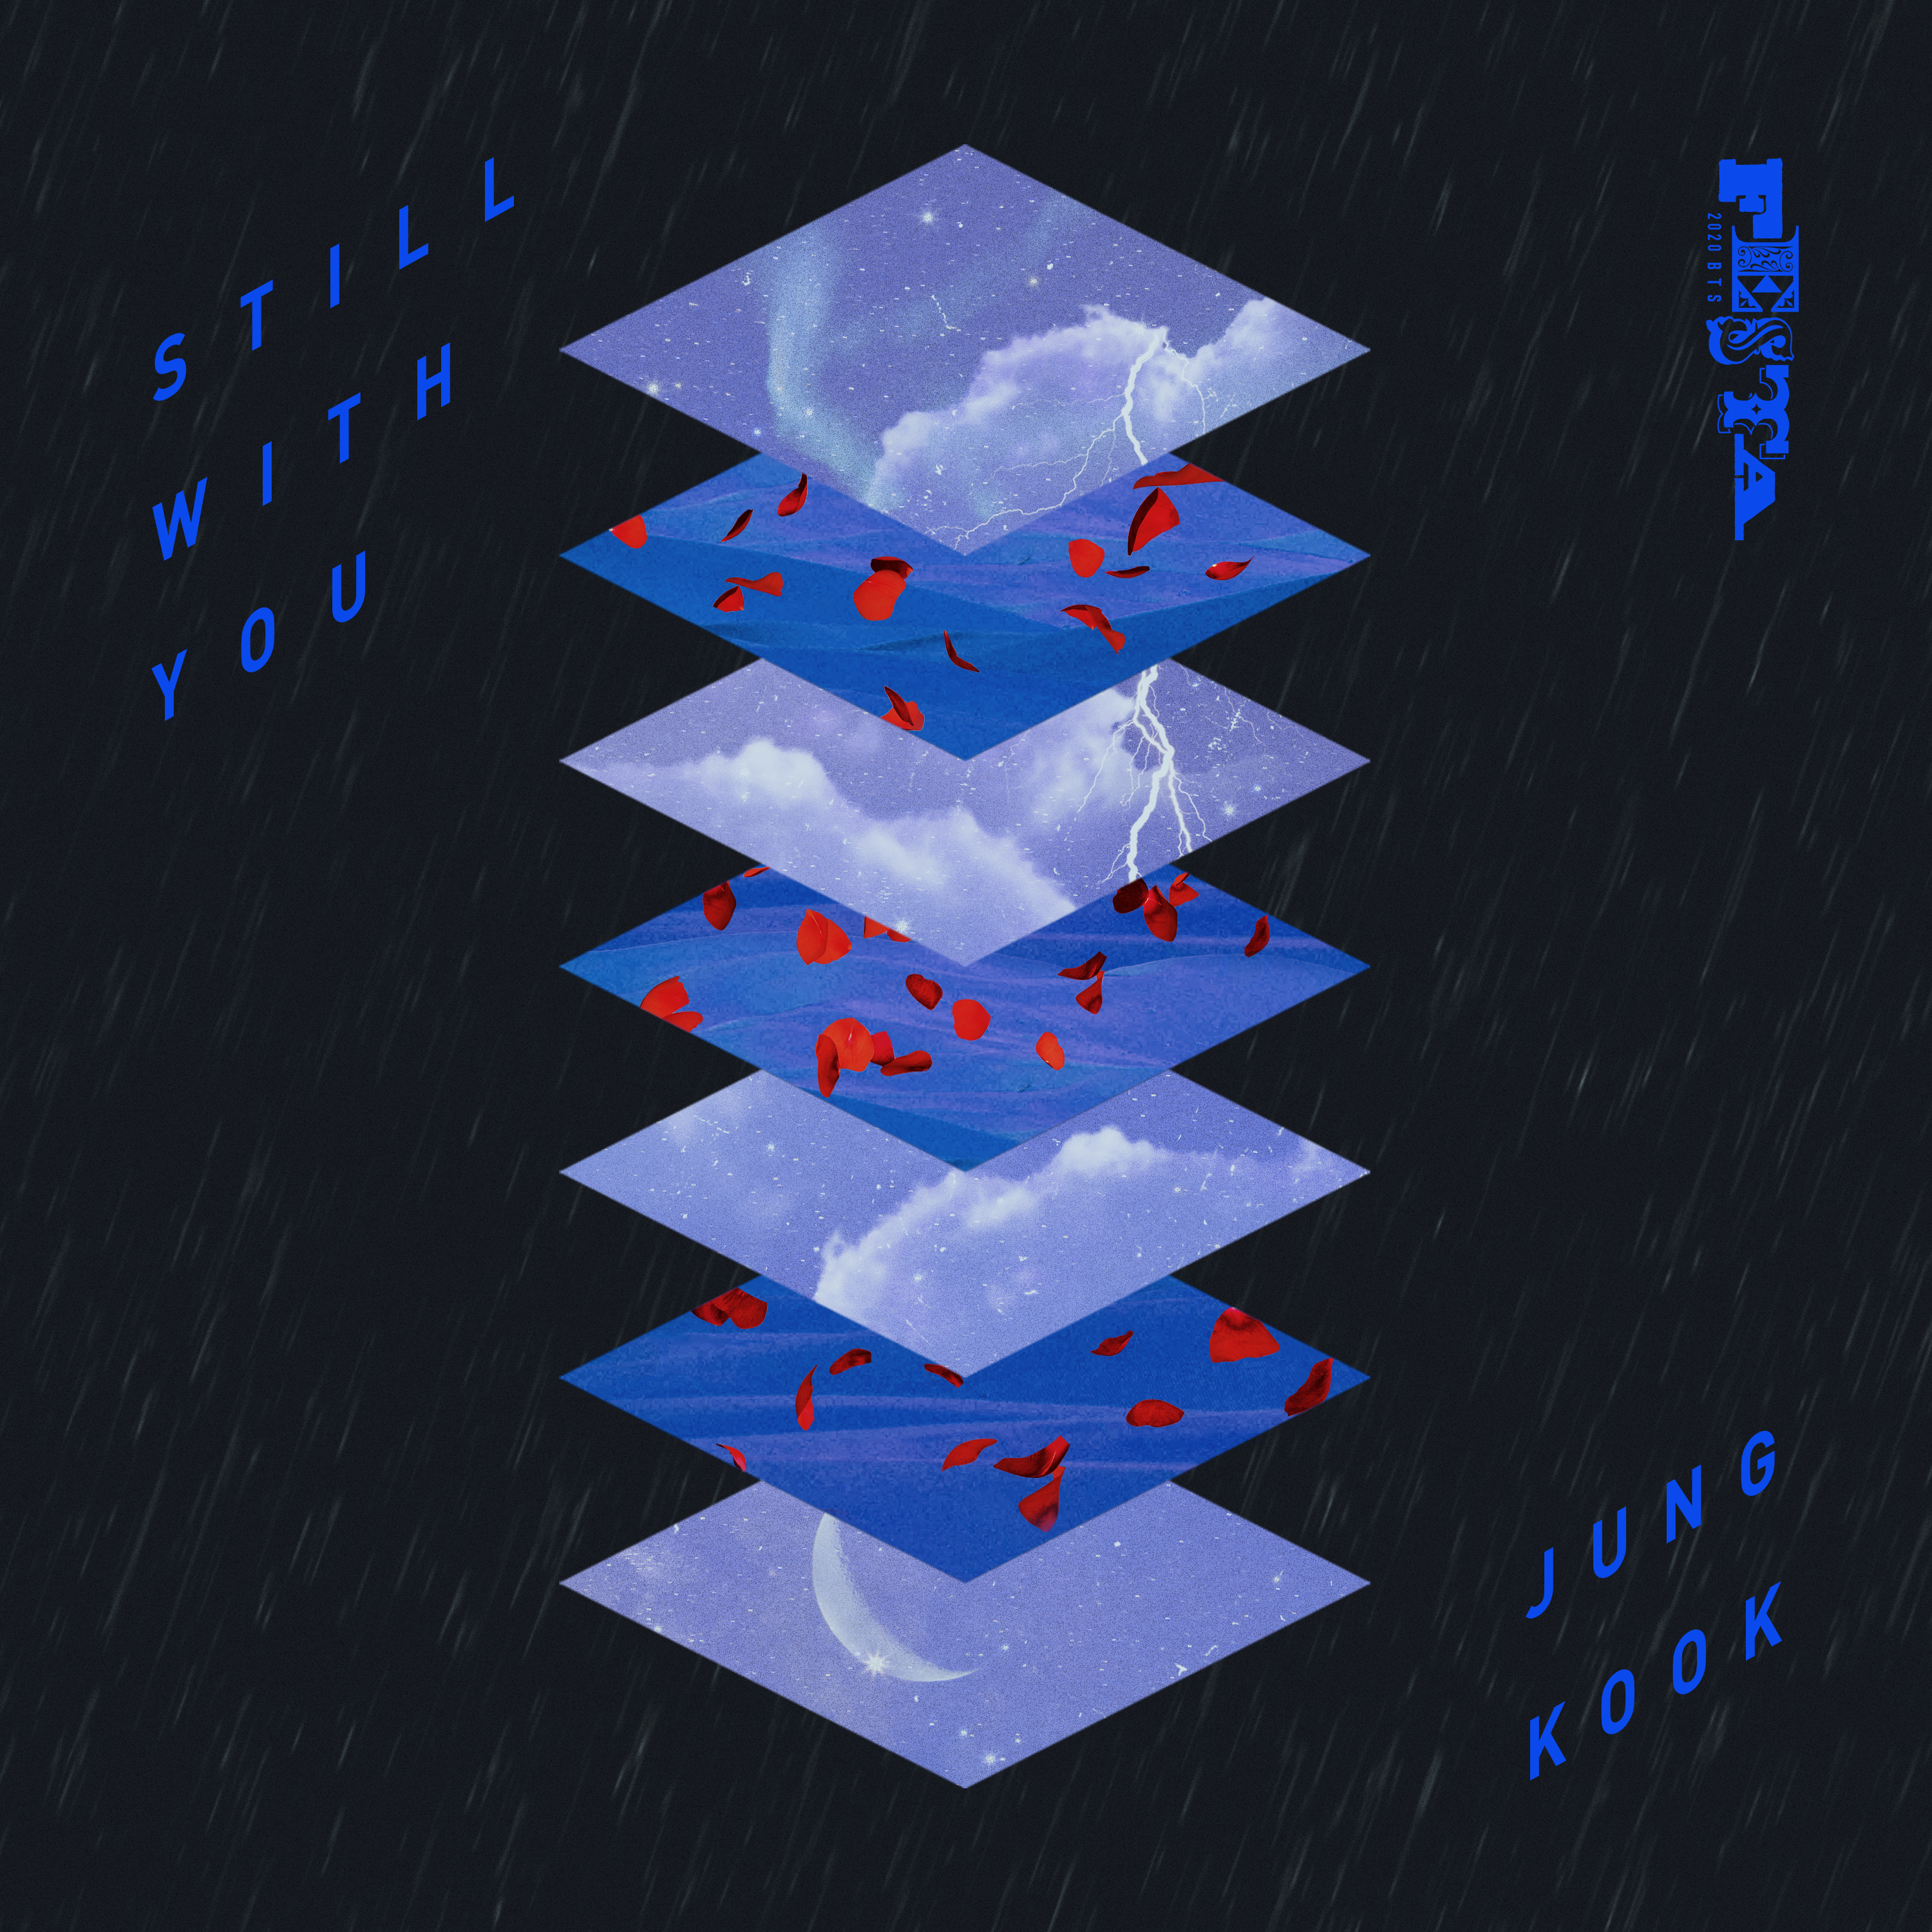 Lae alla Still With You by JK of BTS